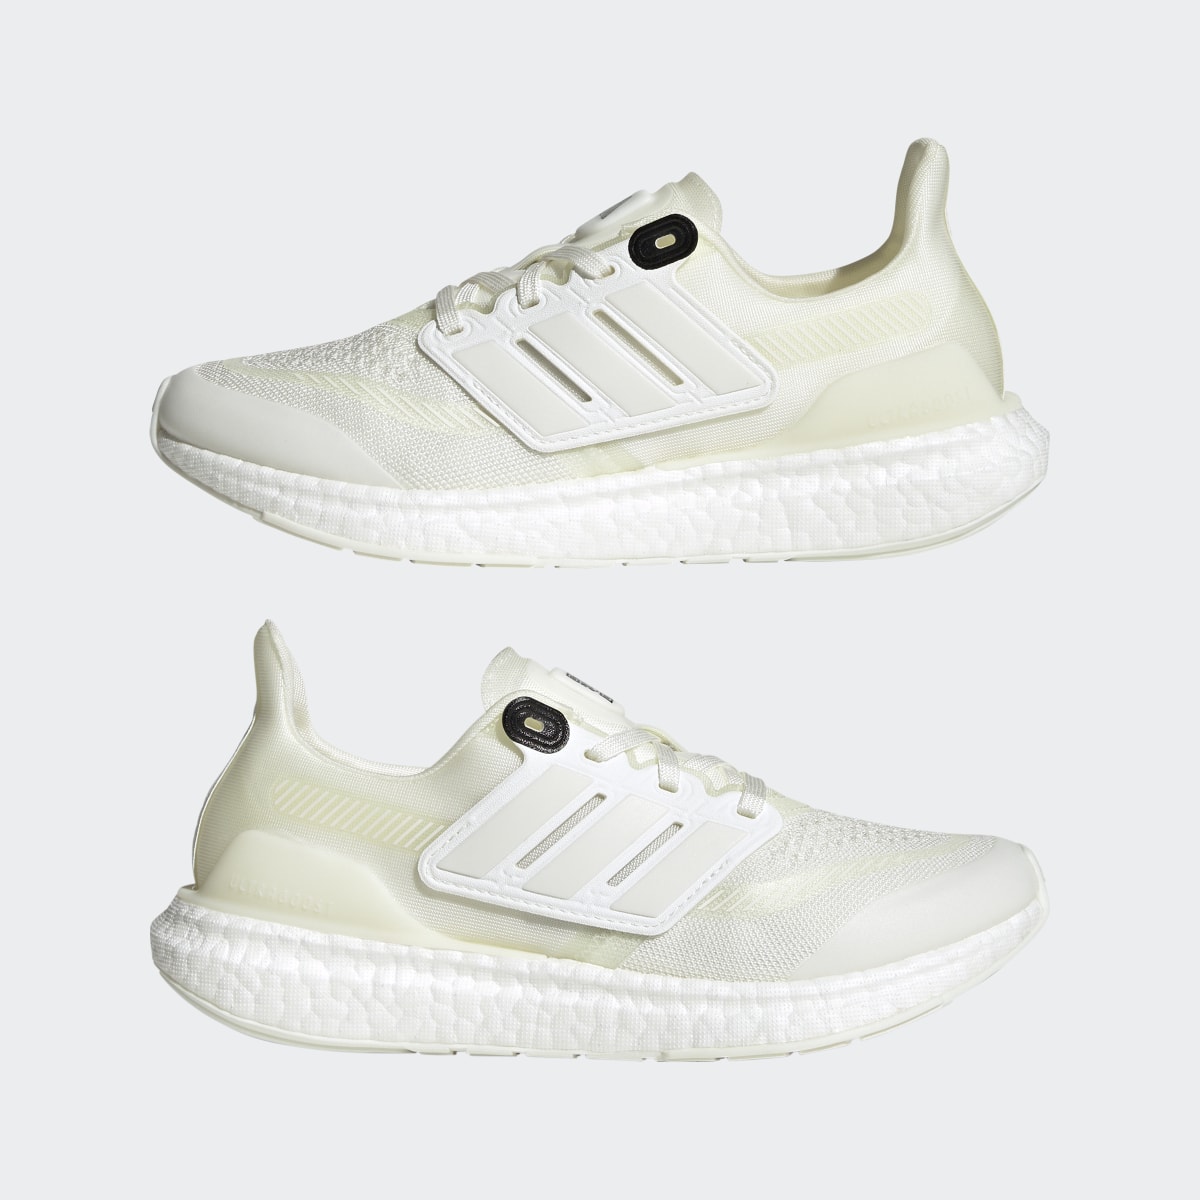 Adidas Chaussure Ultraboost Made to Be Remade 2.0. 11